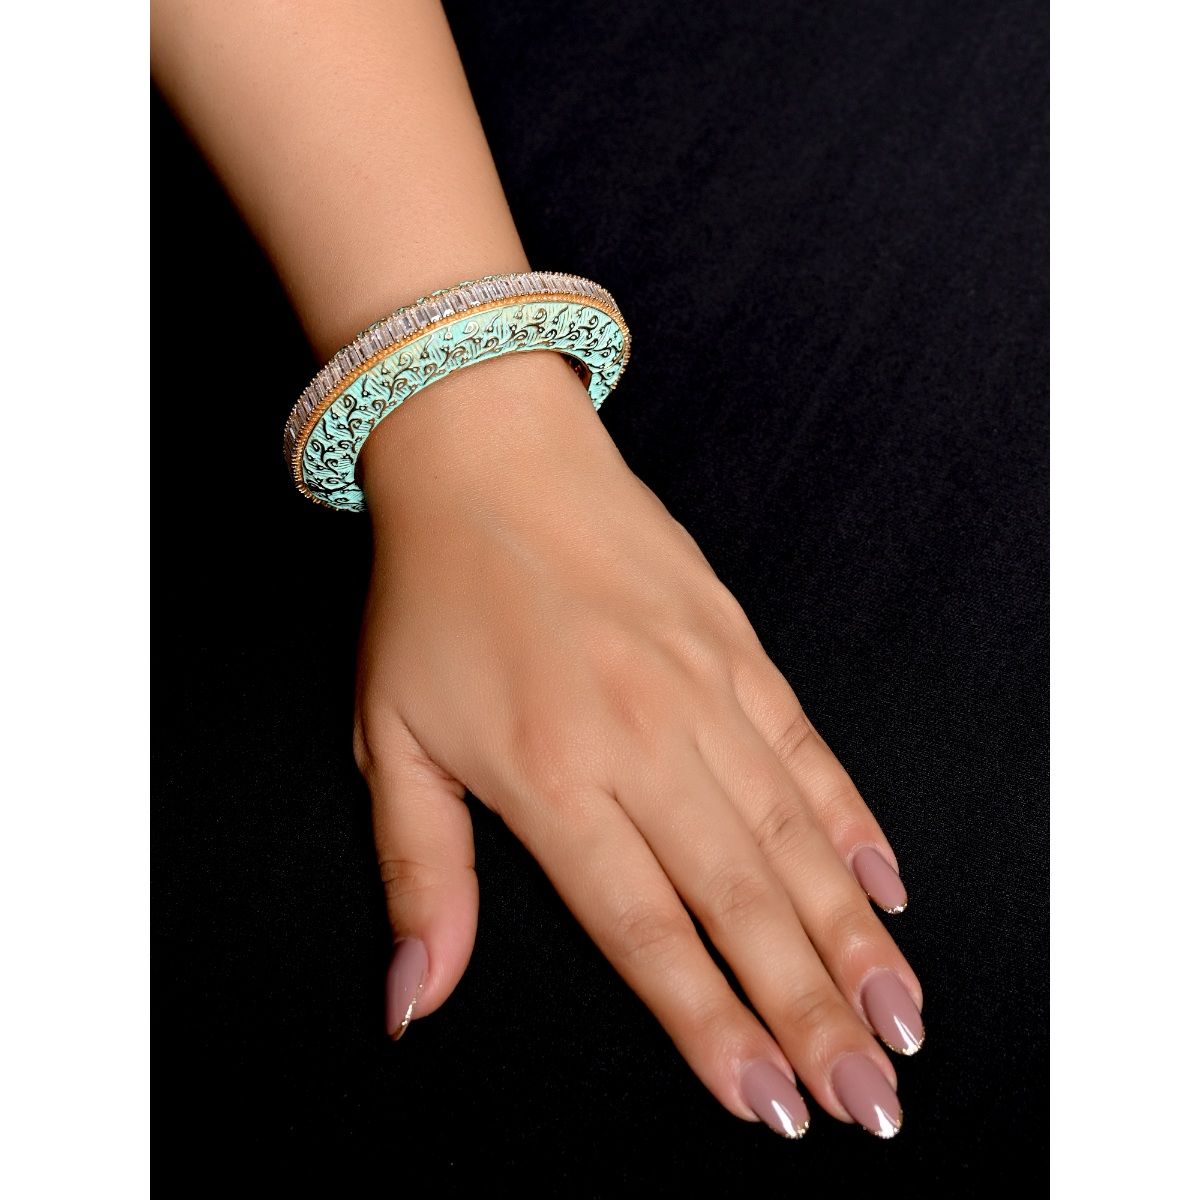 Discover more than 76 mint green bracelet